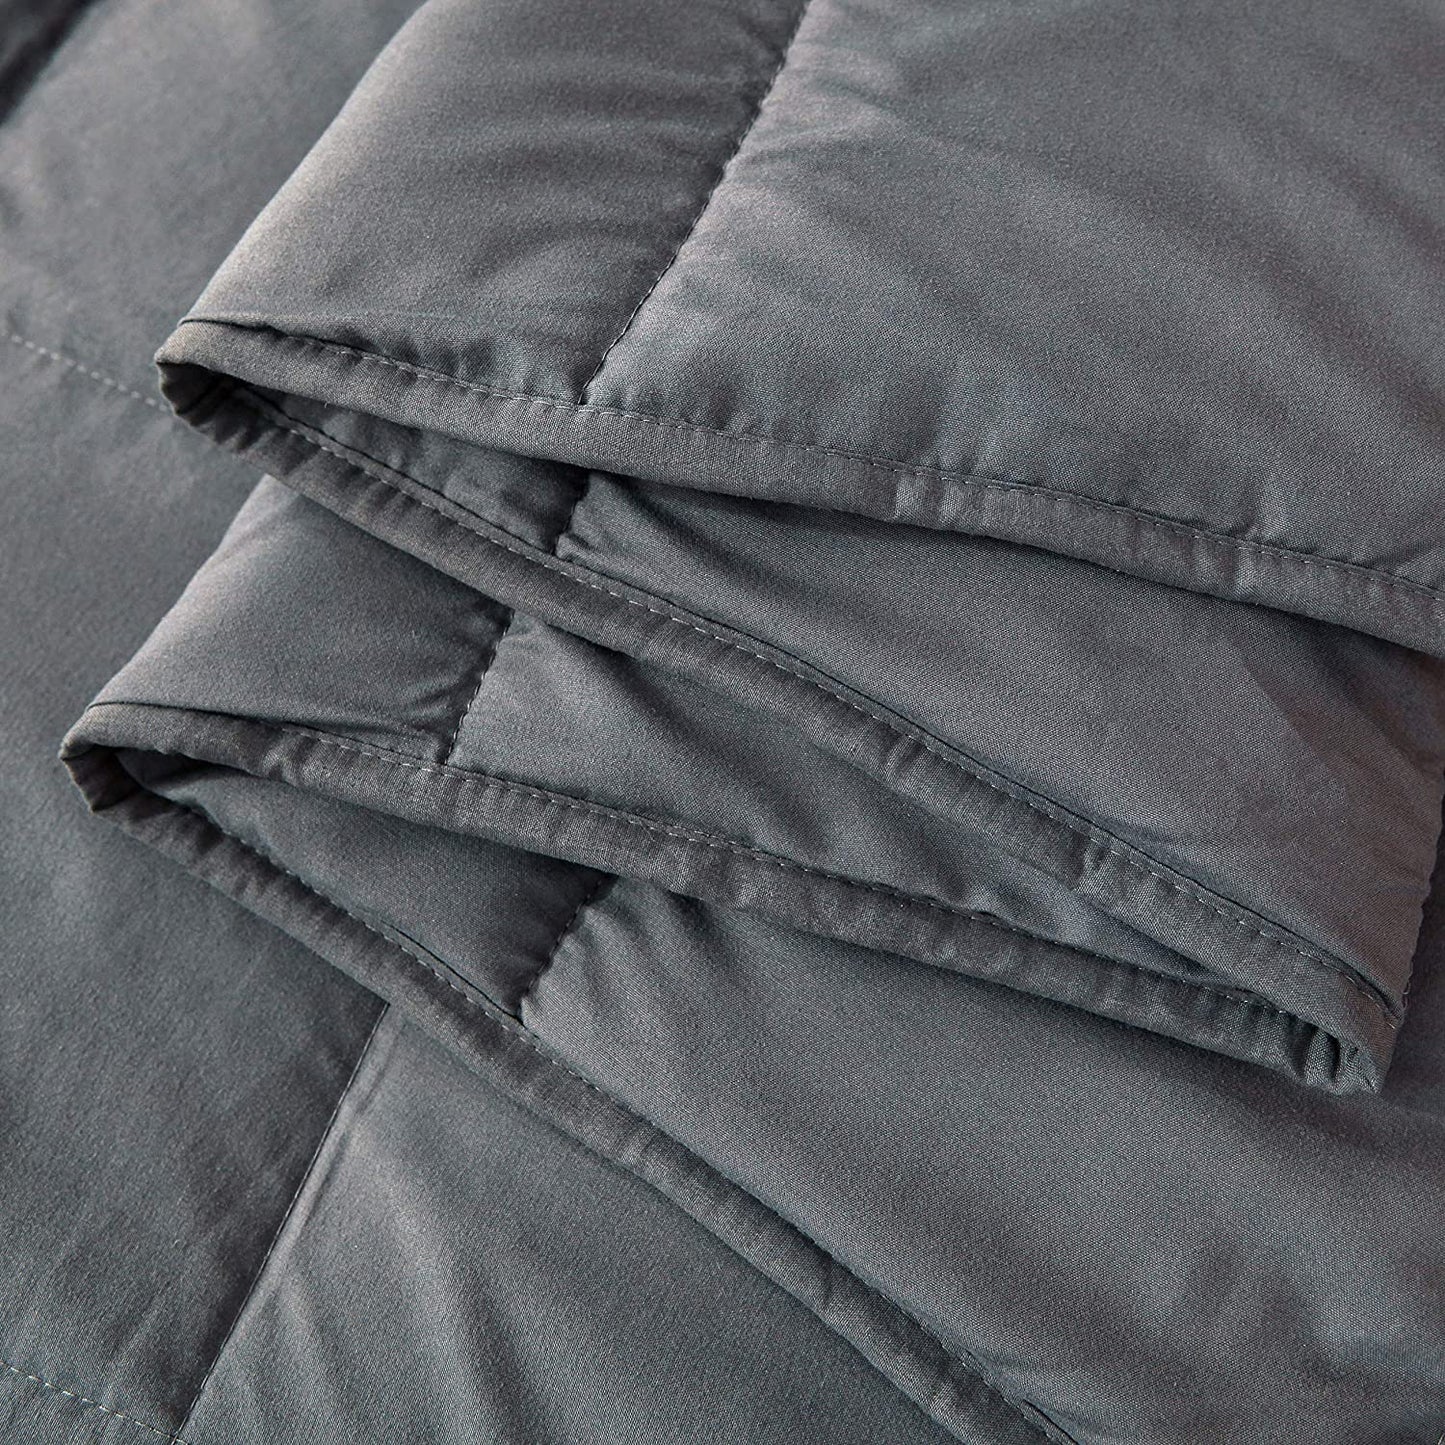 Exclusivo Mezcla Weighted Blanket,7-Layer King/Queen/Twin Size Heavy Blanket with Premium Glass Beads